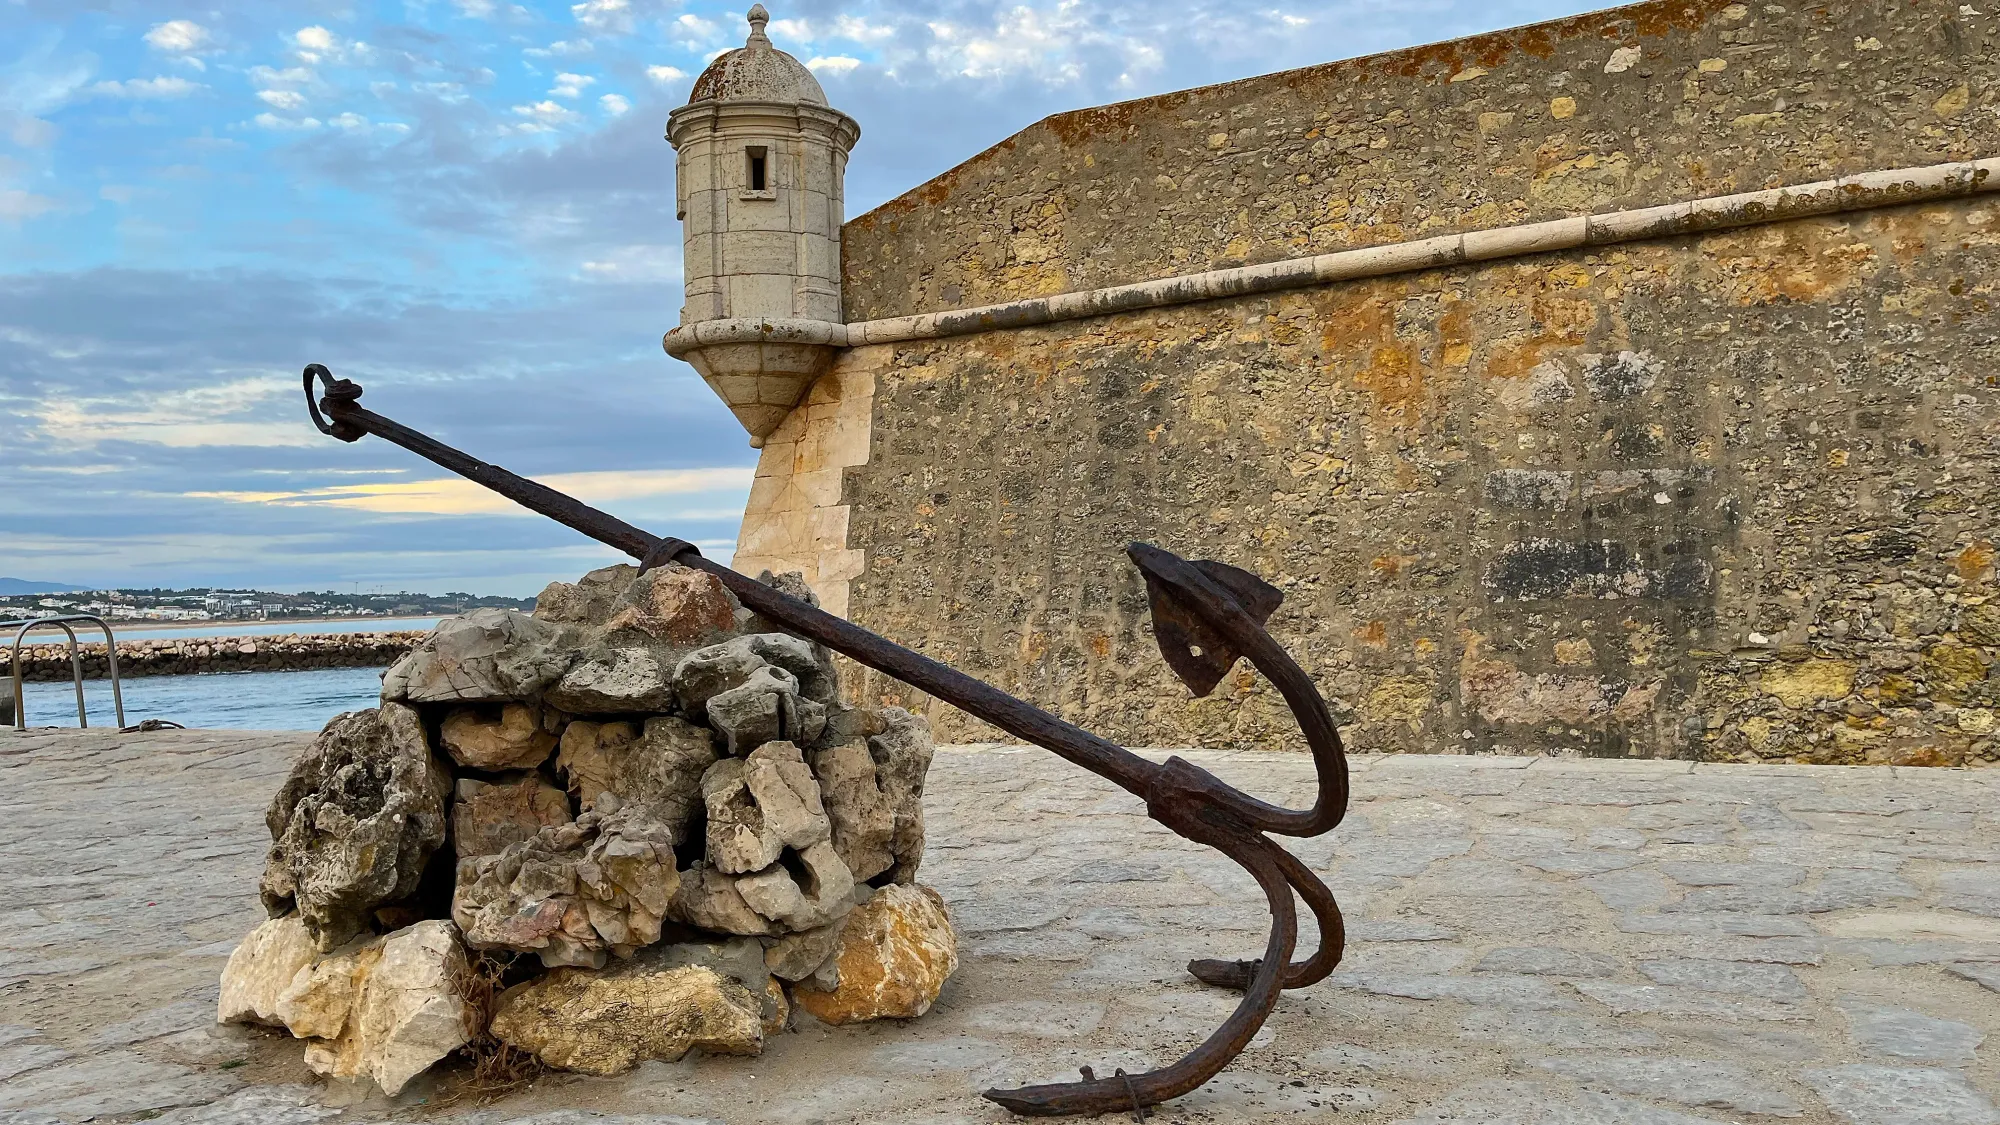 Anchor in front of a stone wall